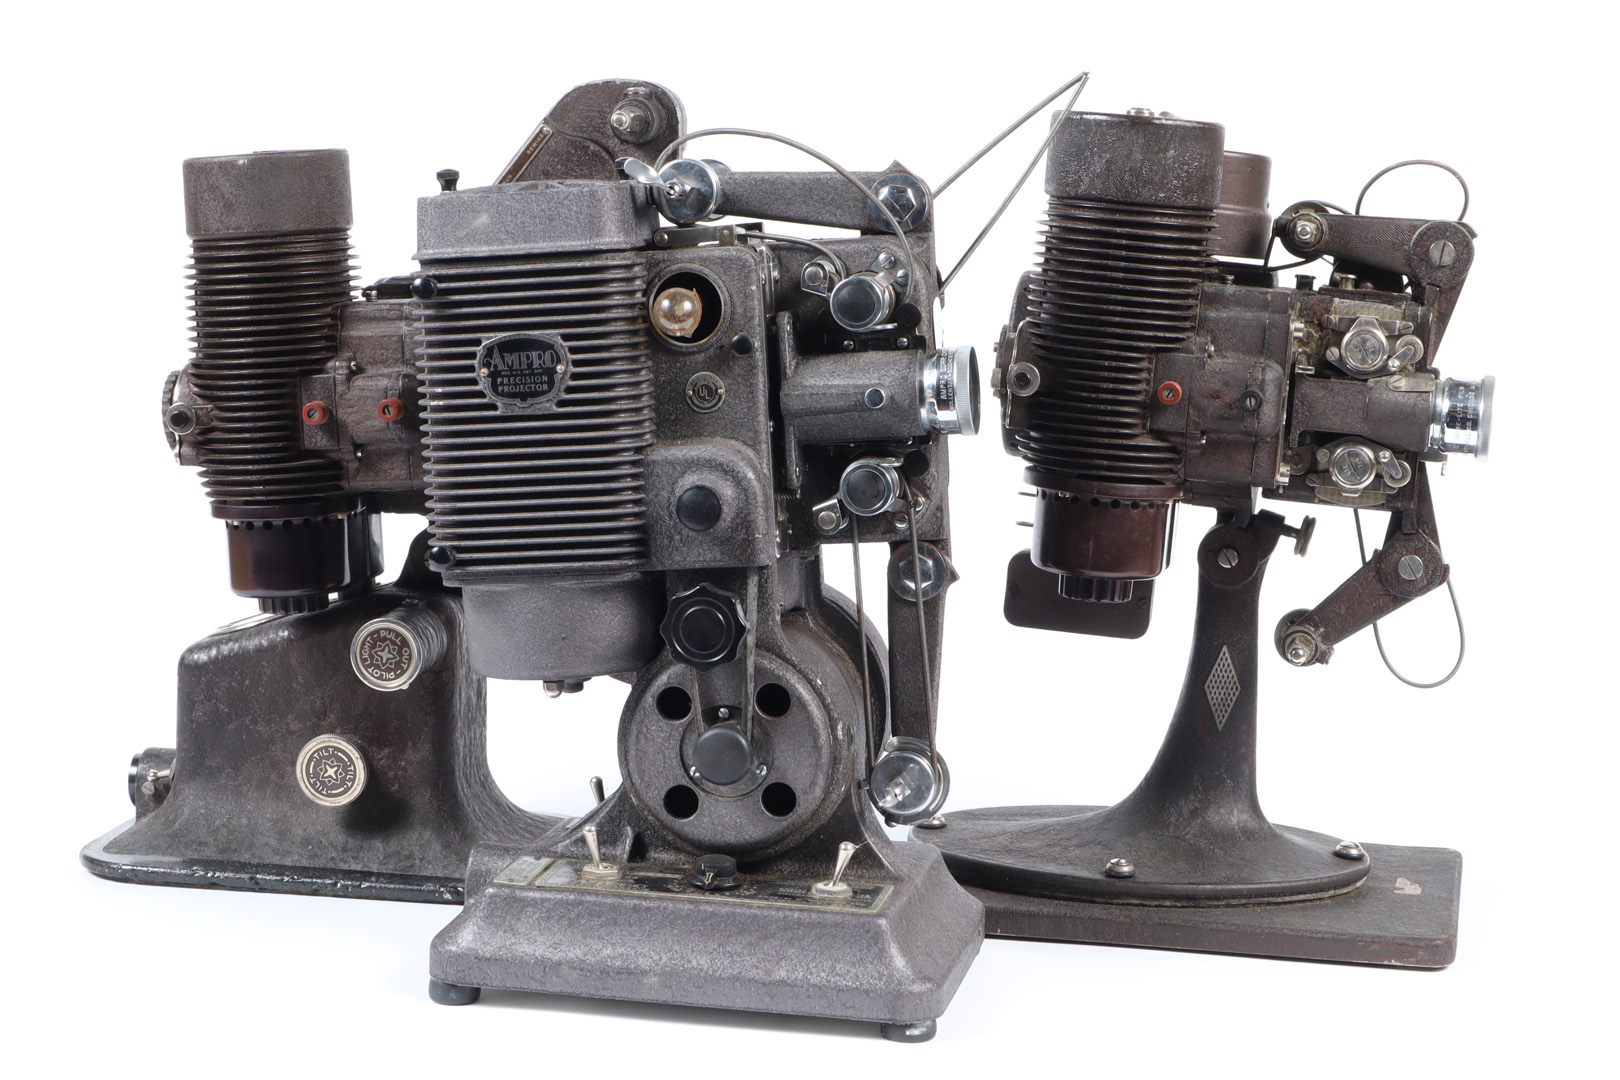 Five United States Vintage 16mm Projectors, comprising three Bell & Howell Filmo 57's, an Ampro KD